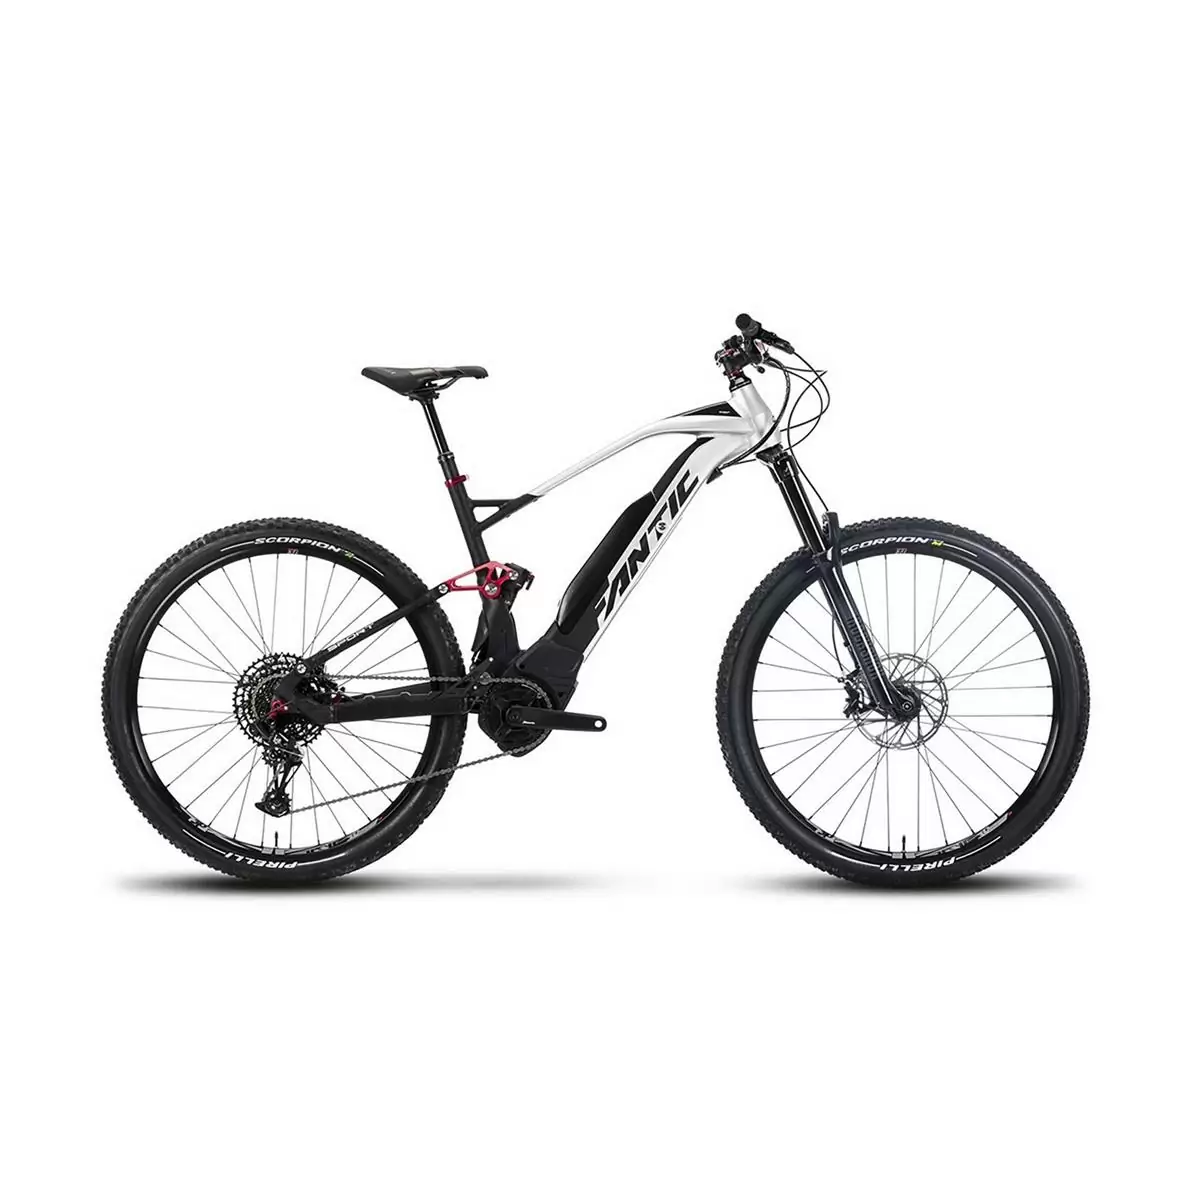 Integra XTF 1.5 29'' 150mm 12s 630wh Brose S-ALU Silver 2022 Size S - image